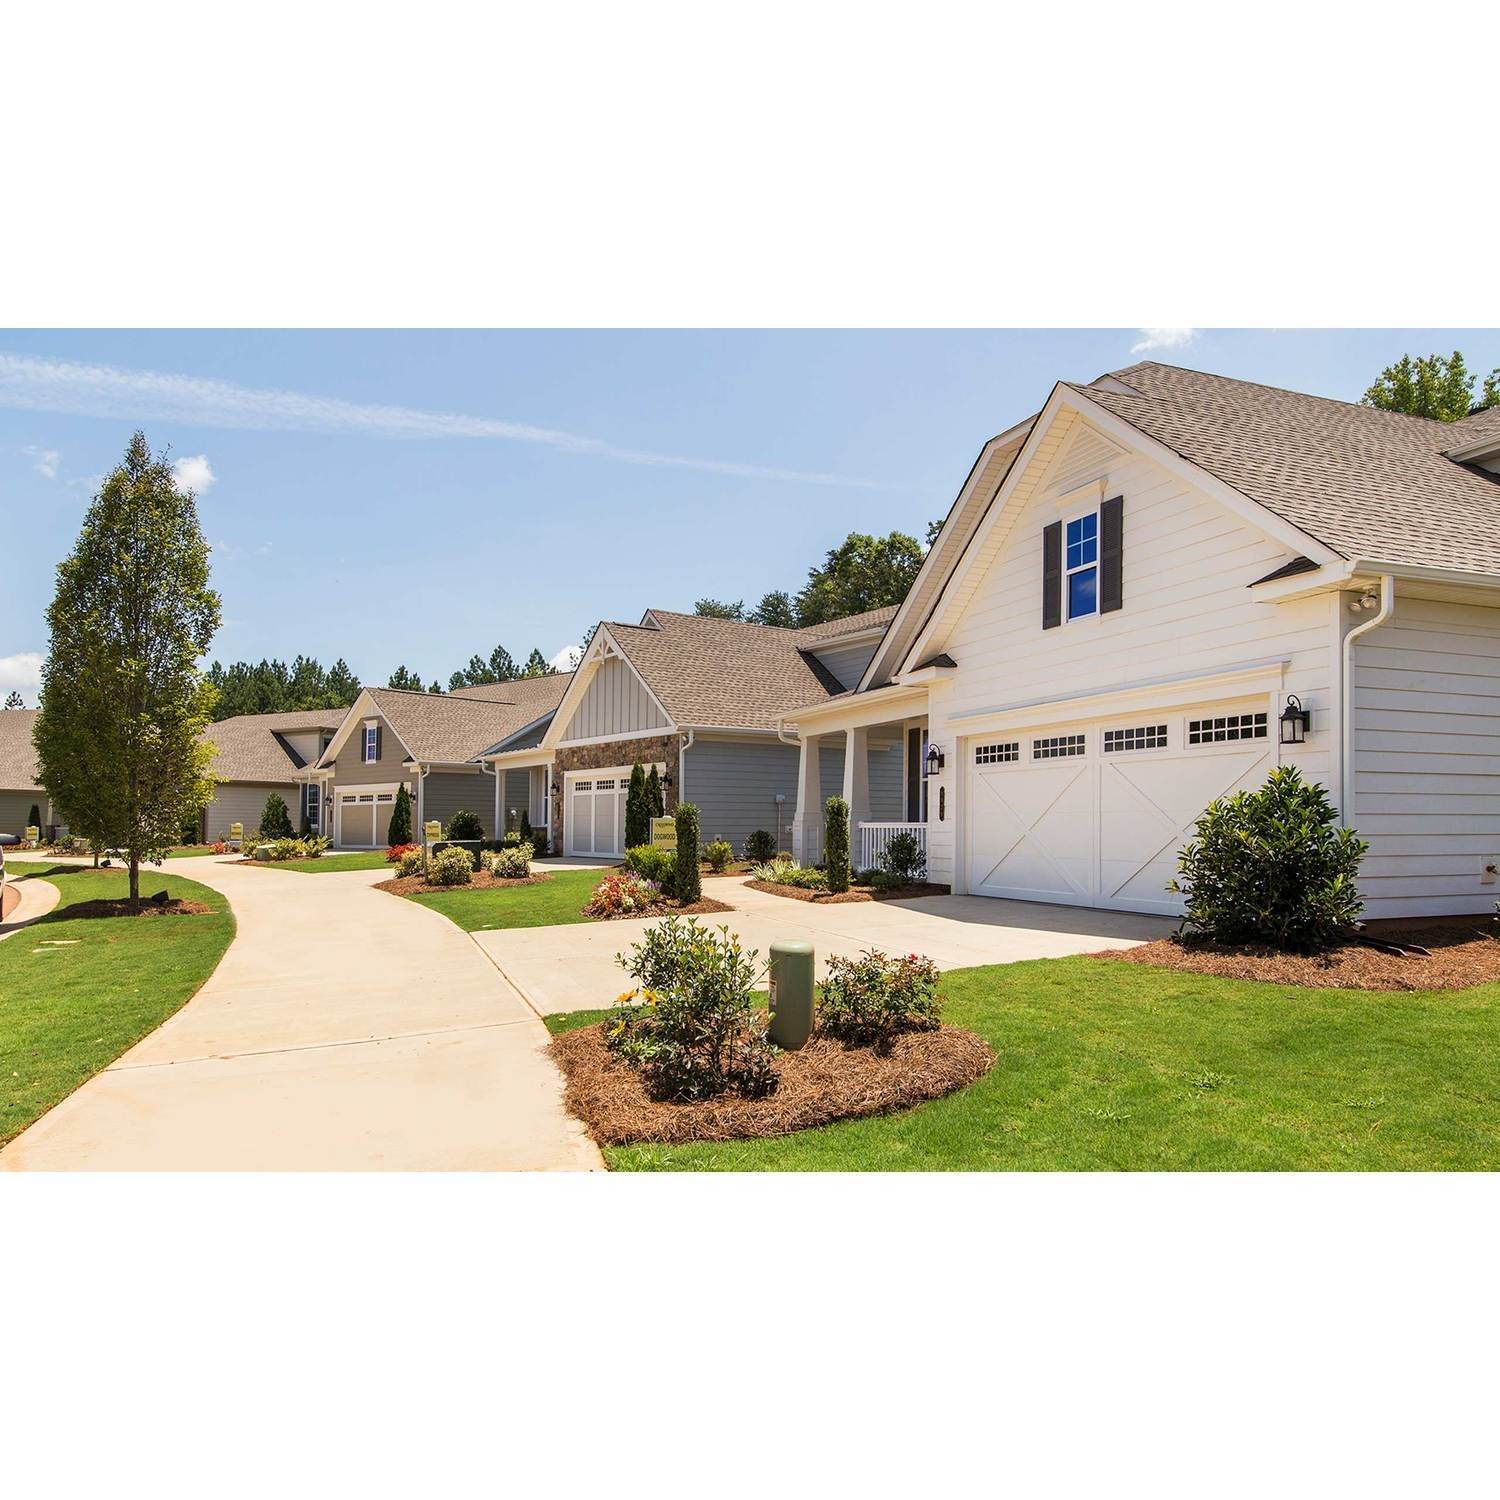 18. Cresswind Charlotte building at 8913 Silver Springs Court, Charlotte, NC 28215